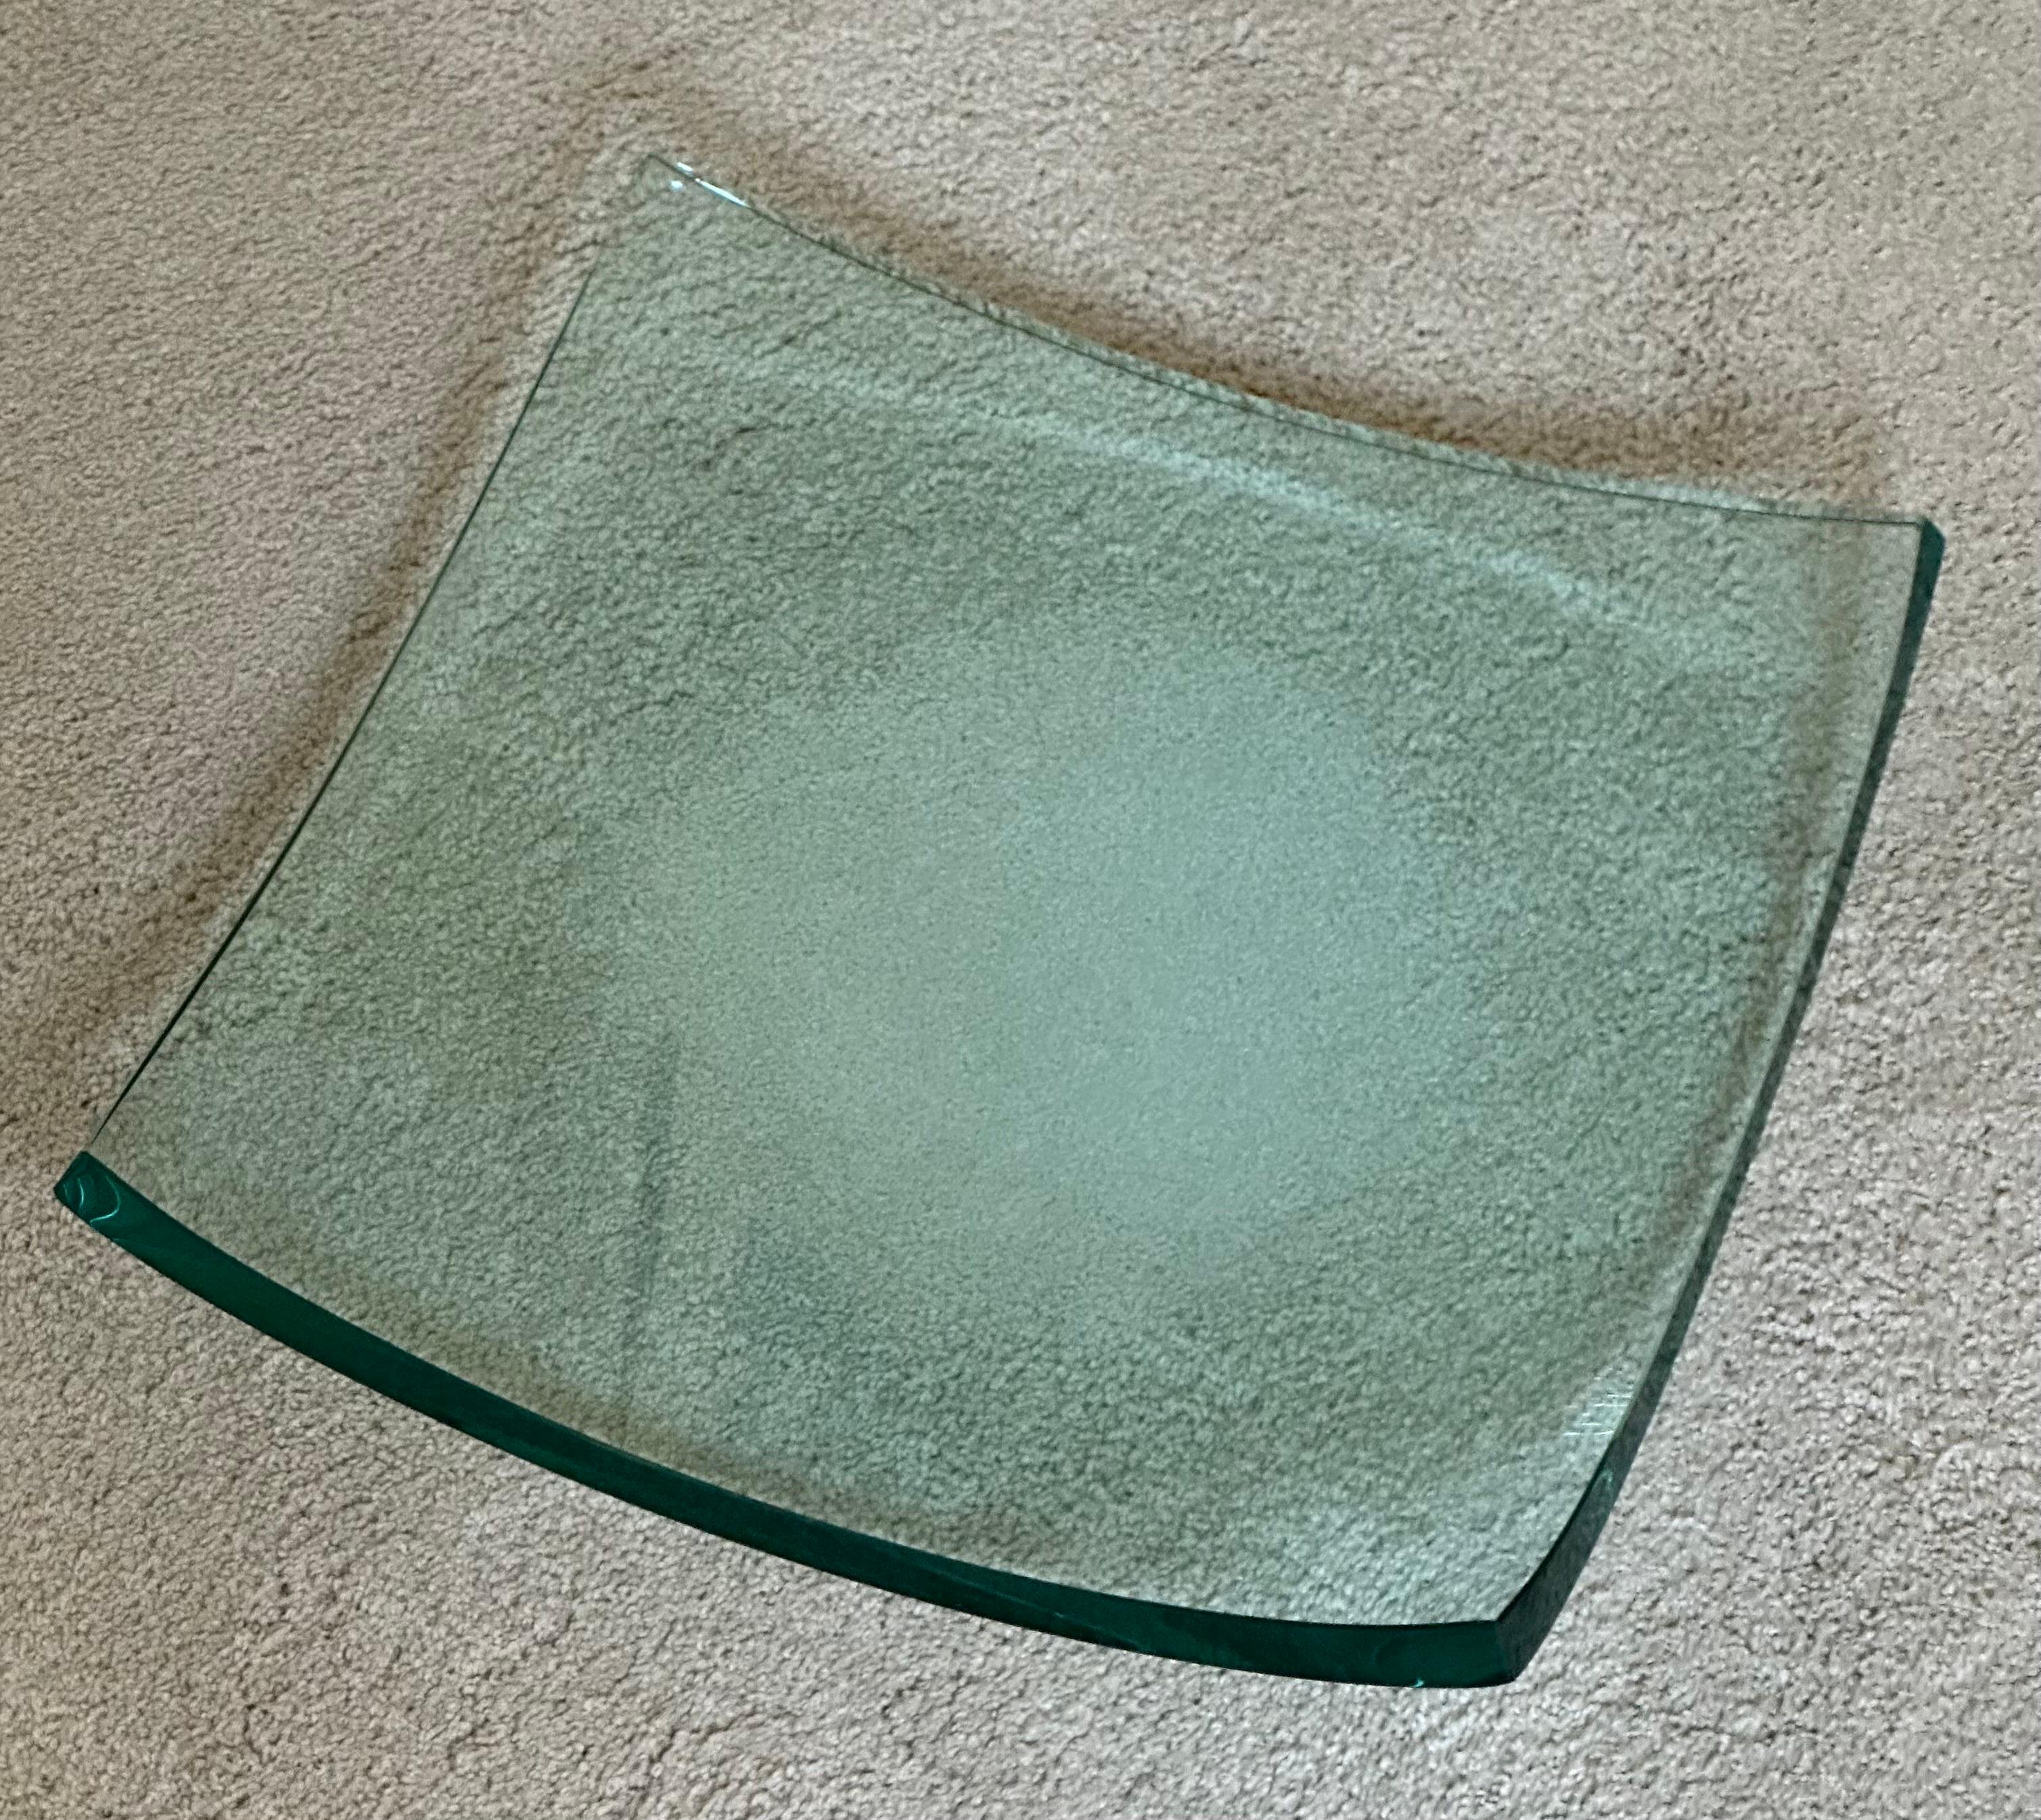 Minimalist modern Italian polished glass bowl / centerpiece in the style of Salvatore Polizzi, circa 1980s. The bowl is in very good vintage condition with no chips or cracks and measures a substantial 16